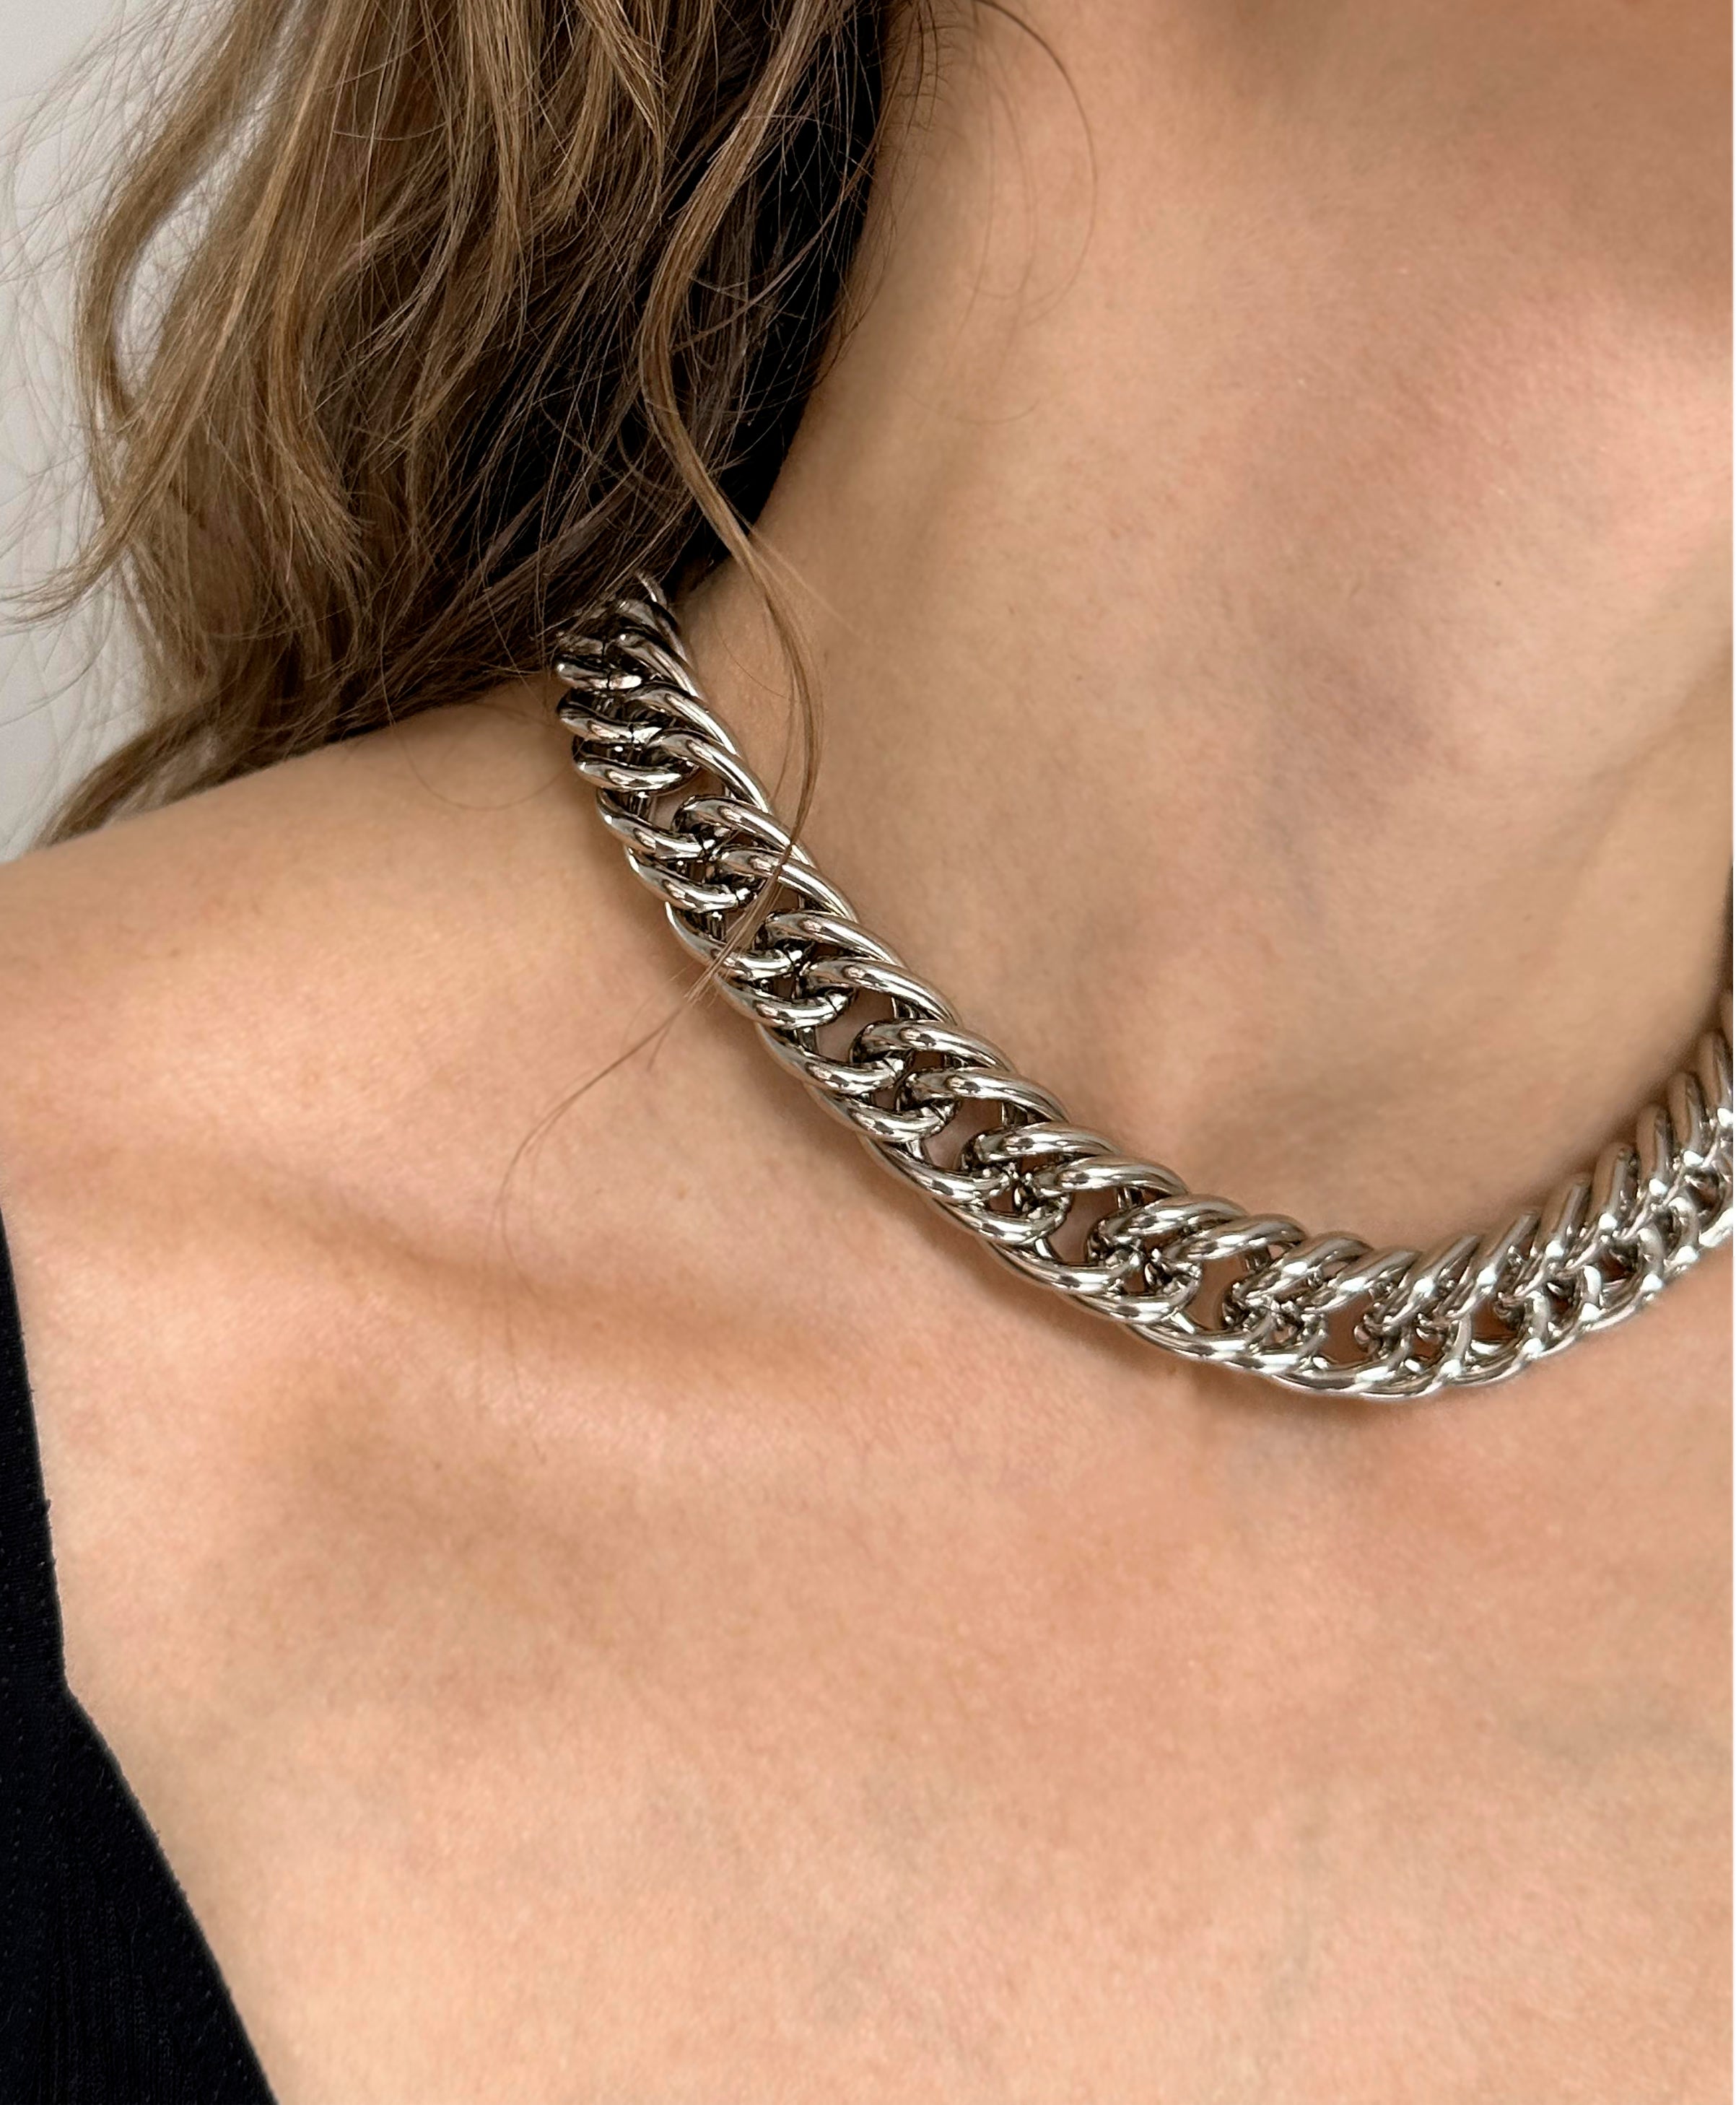 llayers-mens-women-jewelry-silver-stainlesssteel-choker-chain-necklace-unchained-006-Brooklyn-New-York-4